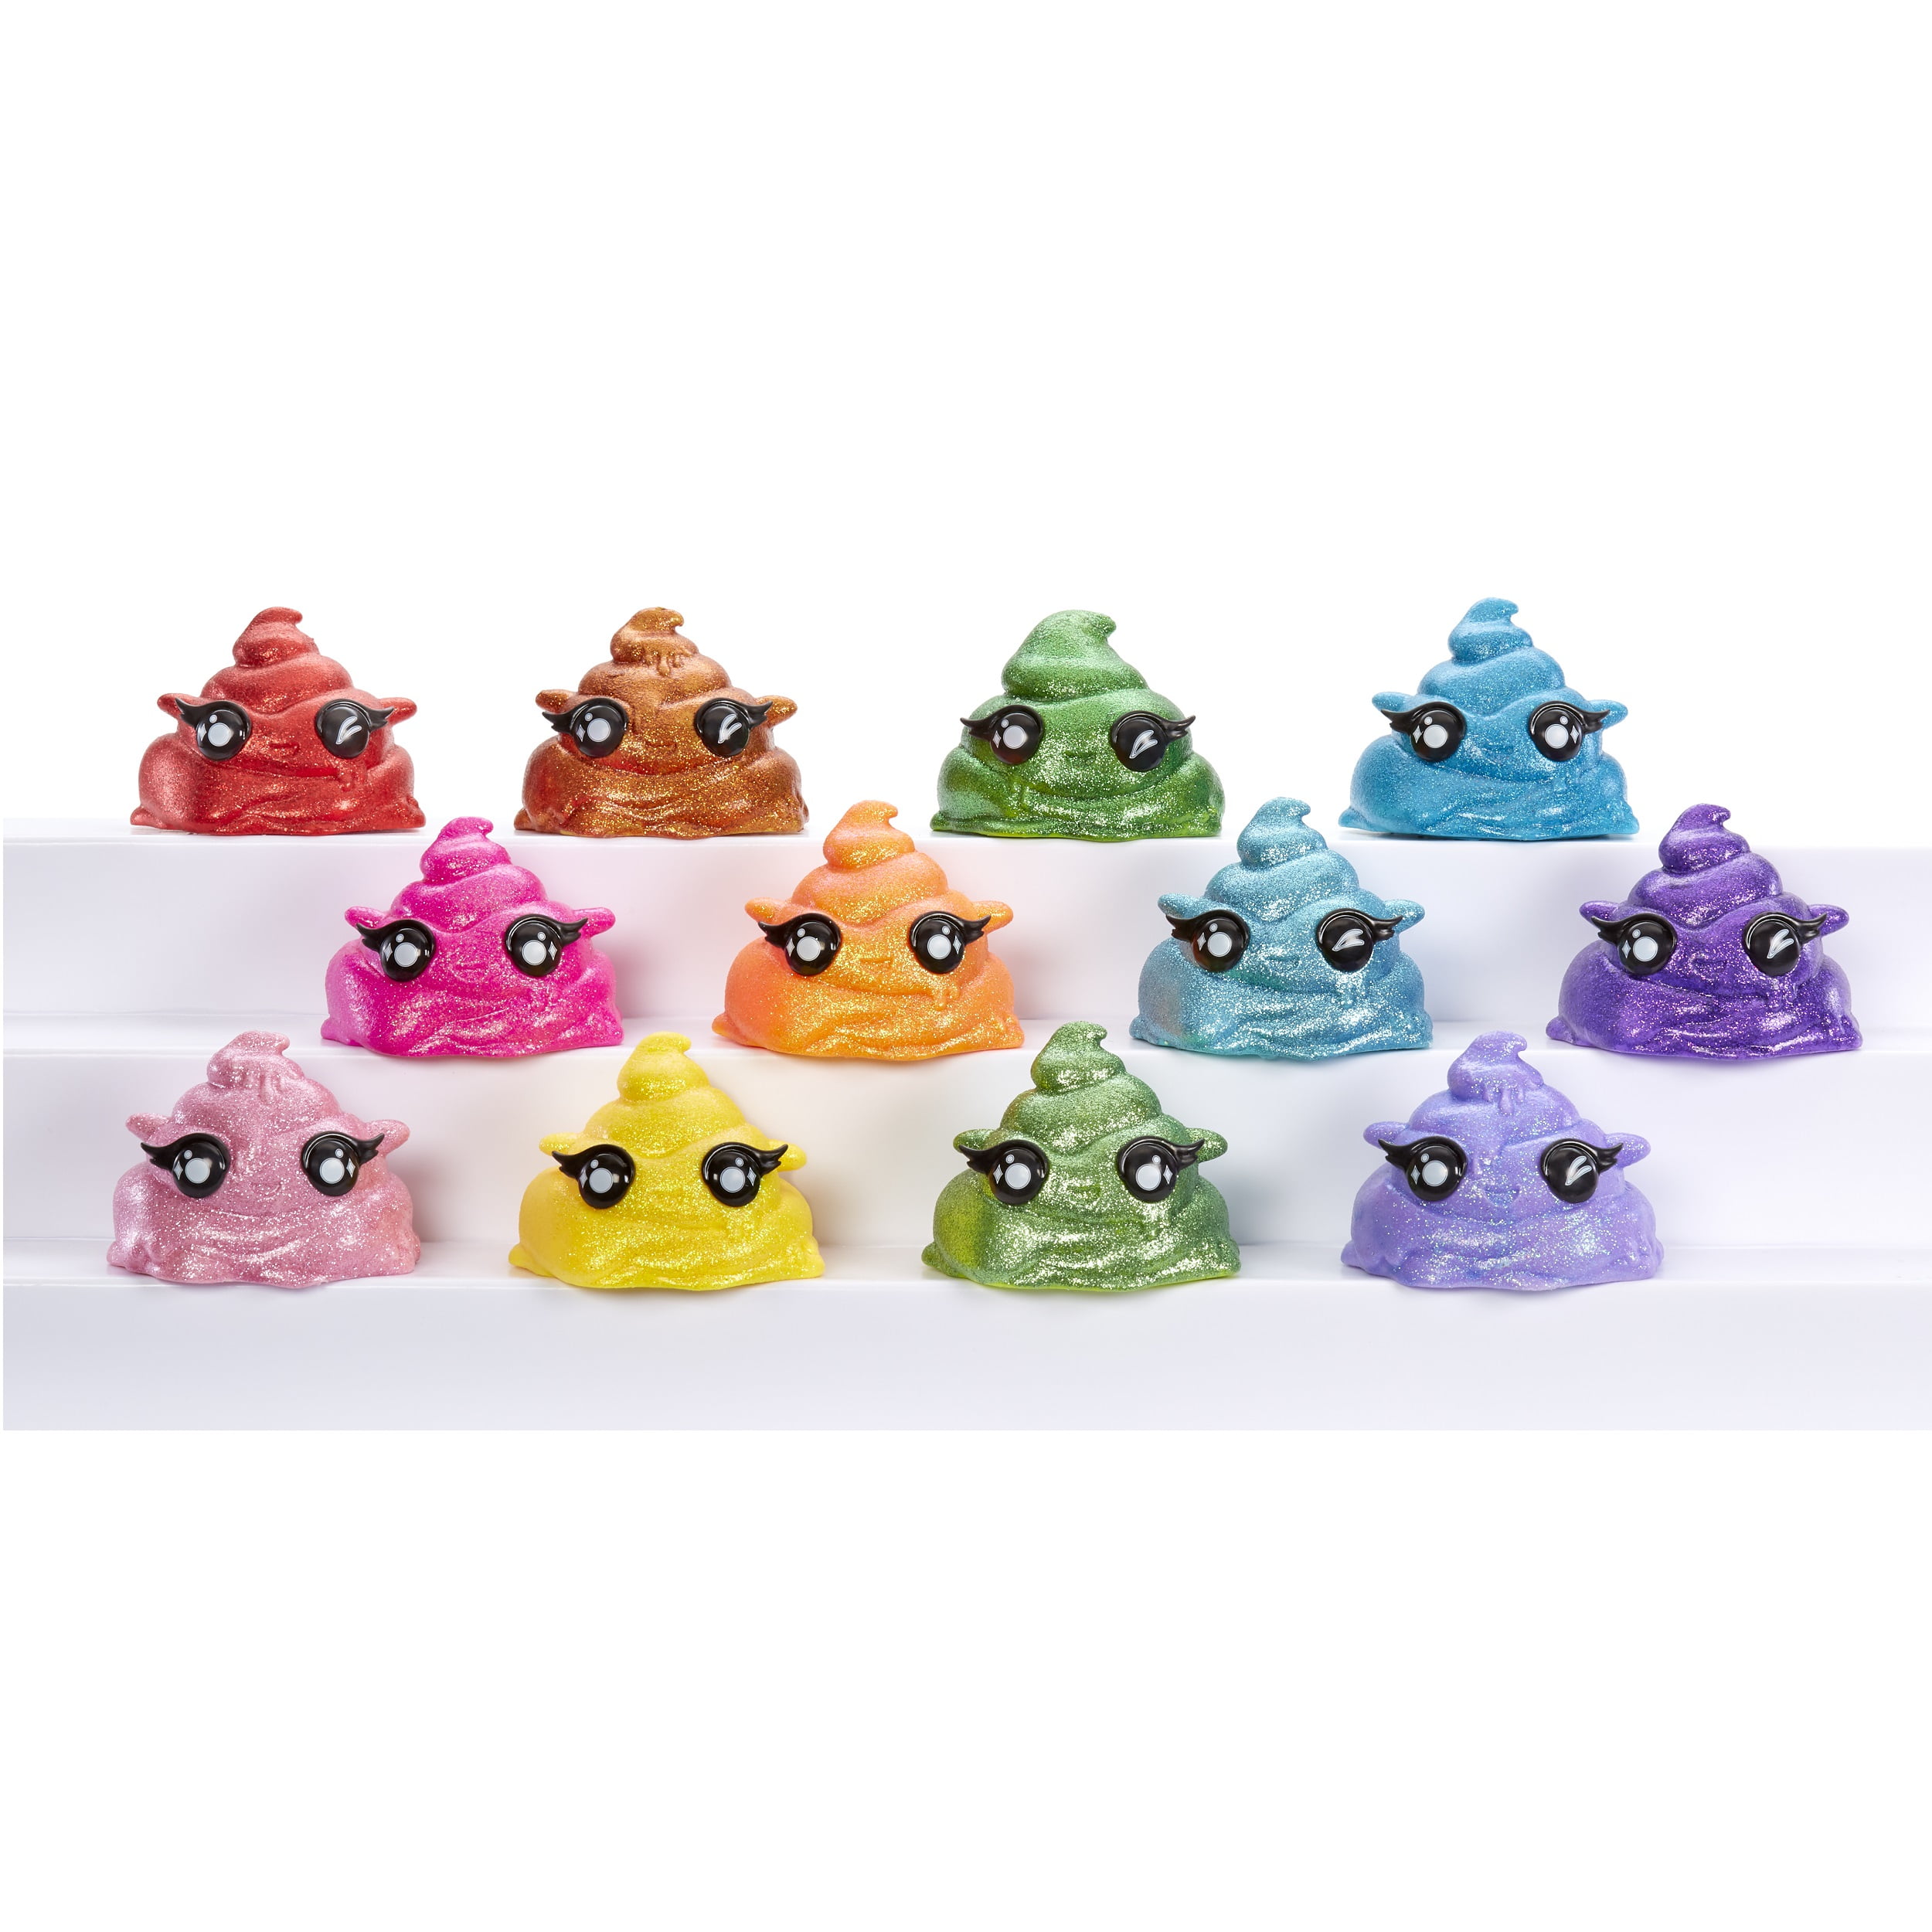 1 X poopsie cutie tooties Surprise Slime Toy Collectible NEW